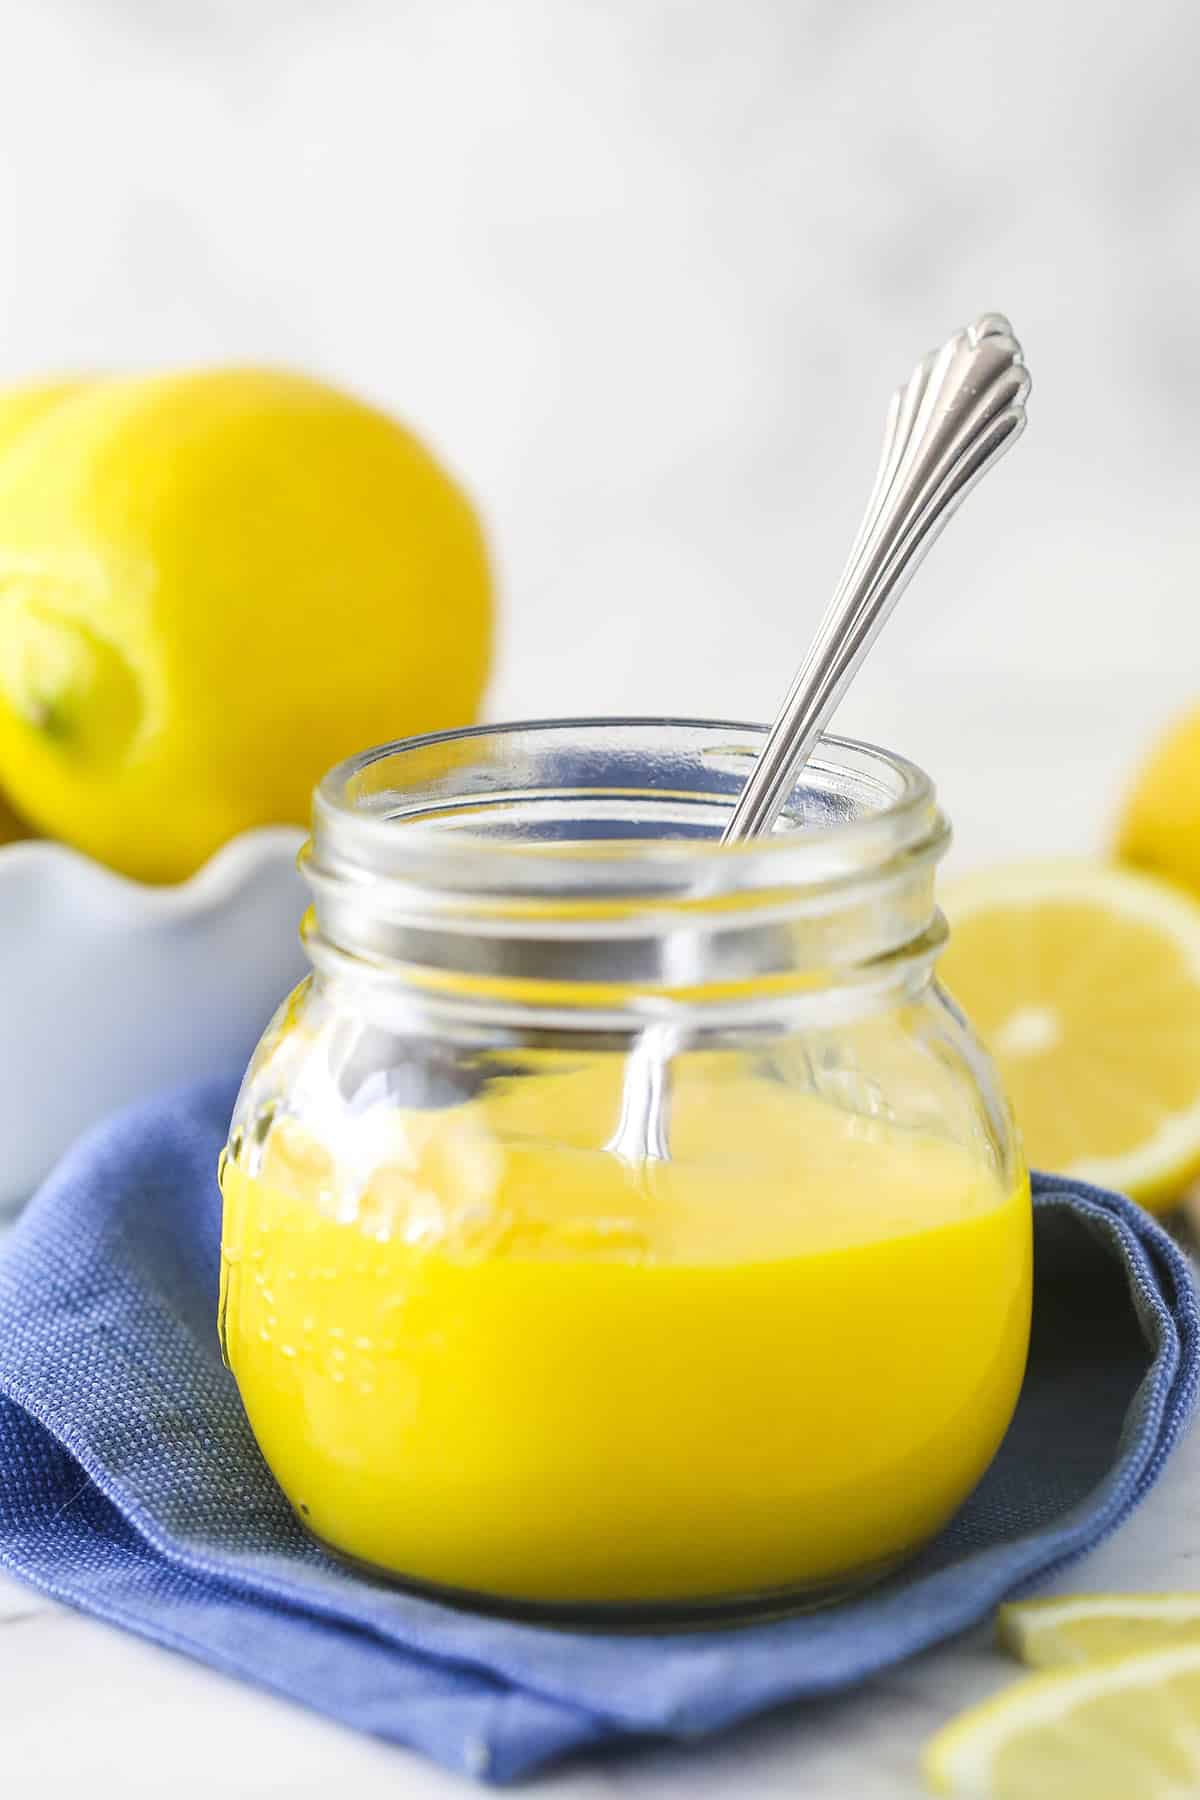 How to Make Lemon Curd - The Cup of Life